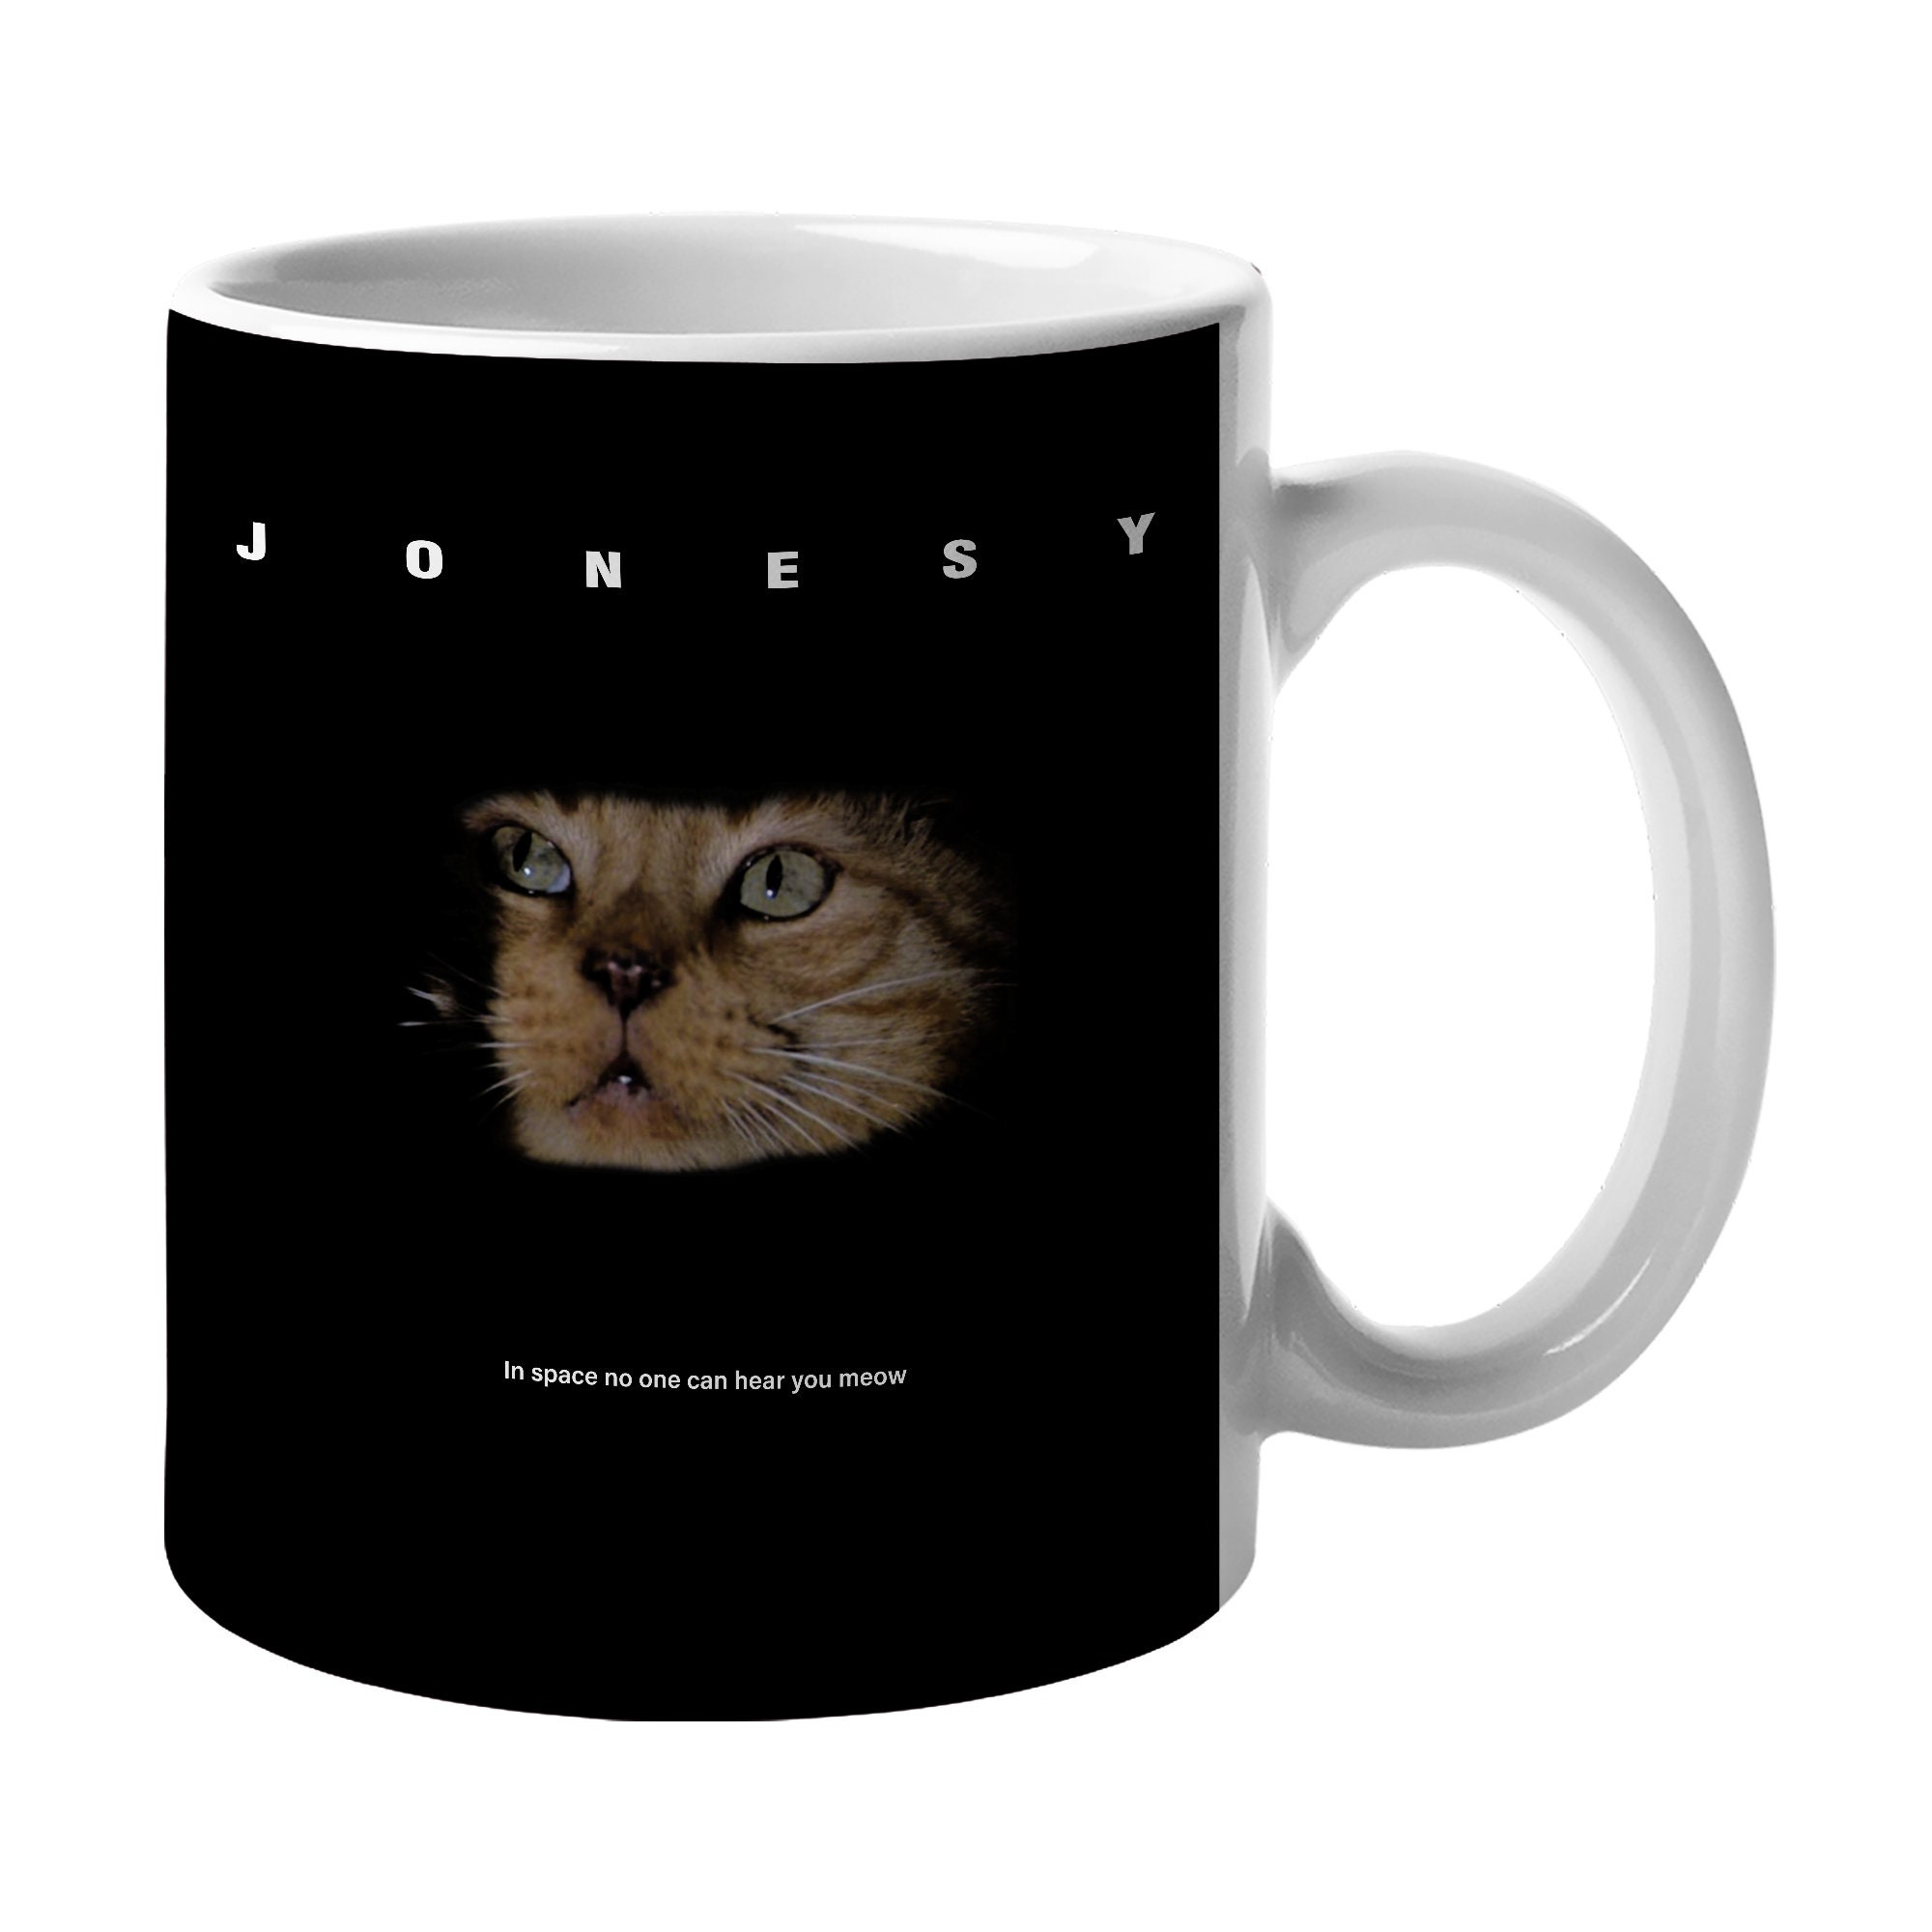 Discover Jonesy From Alien 1979 Mug Jones (Cat) Tomcat Cup Ripley's Cat Film Movie In Space No One Can Hear You Meow Coffee Mug